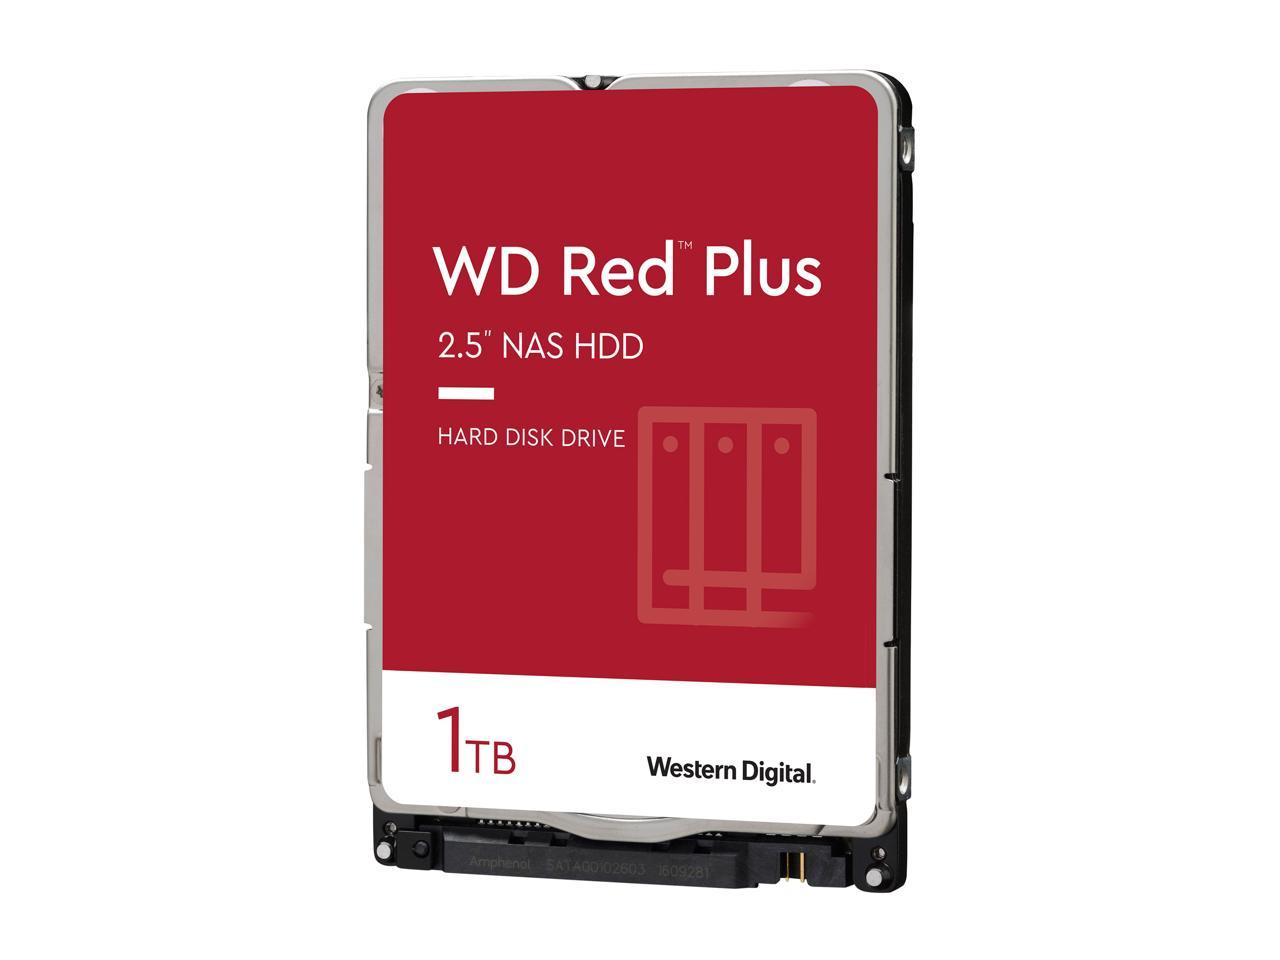 Wd Red Plus 1Tb Nas Hard Disk Drive - 5400 Rpm Class Sata 6Gb/S 16Mb Cache 2.5 Inch - Wd10Jfcx